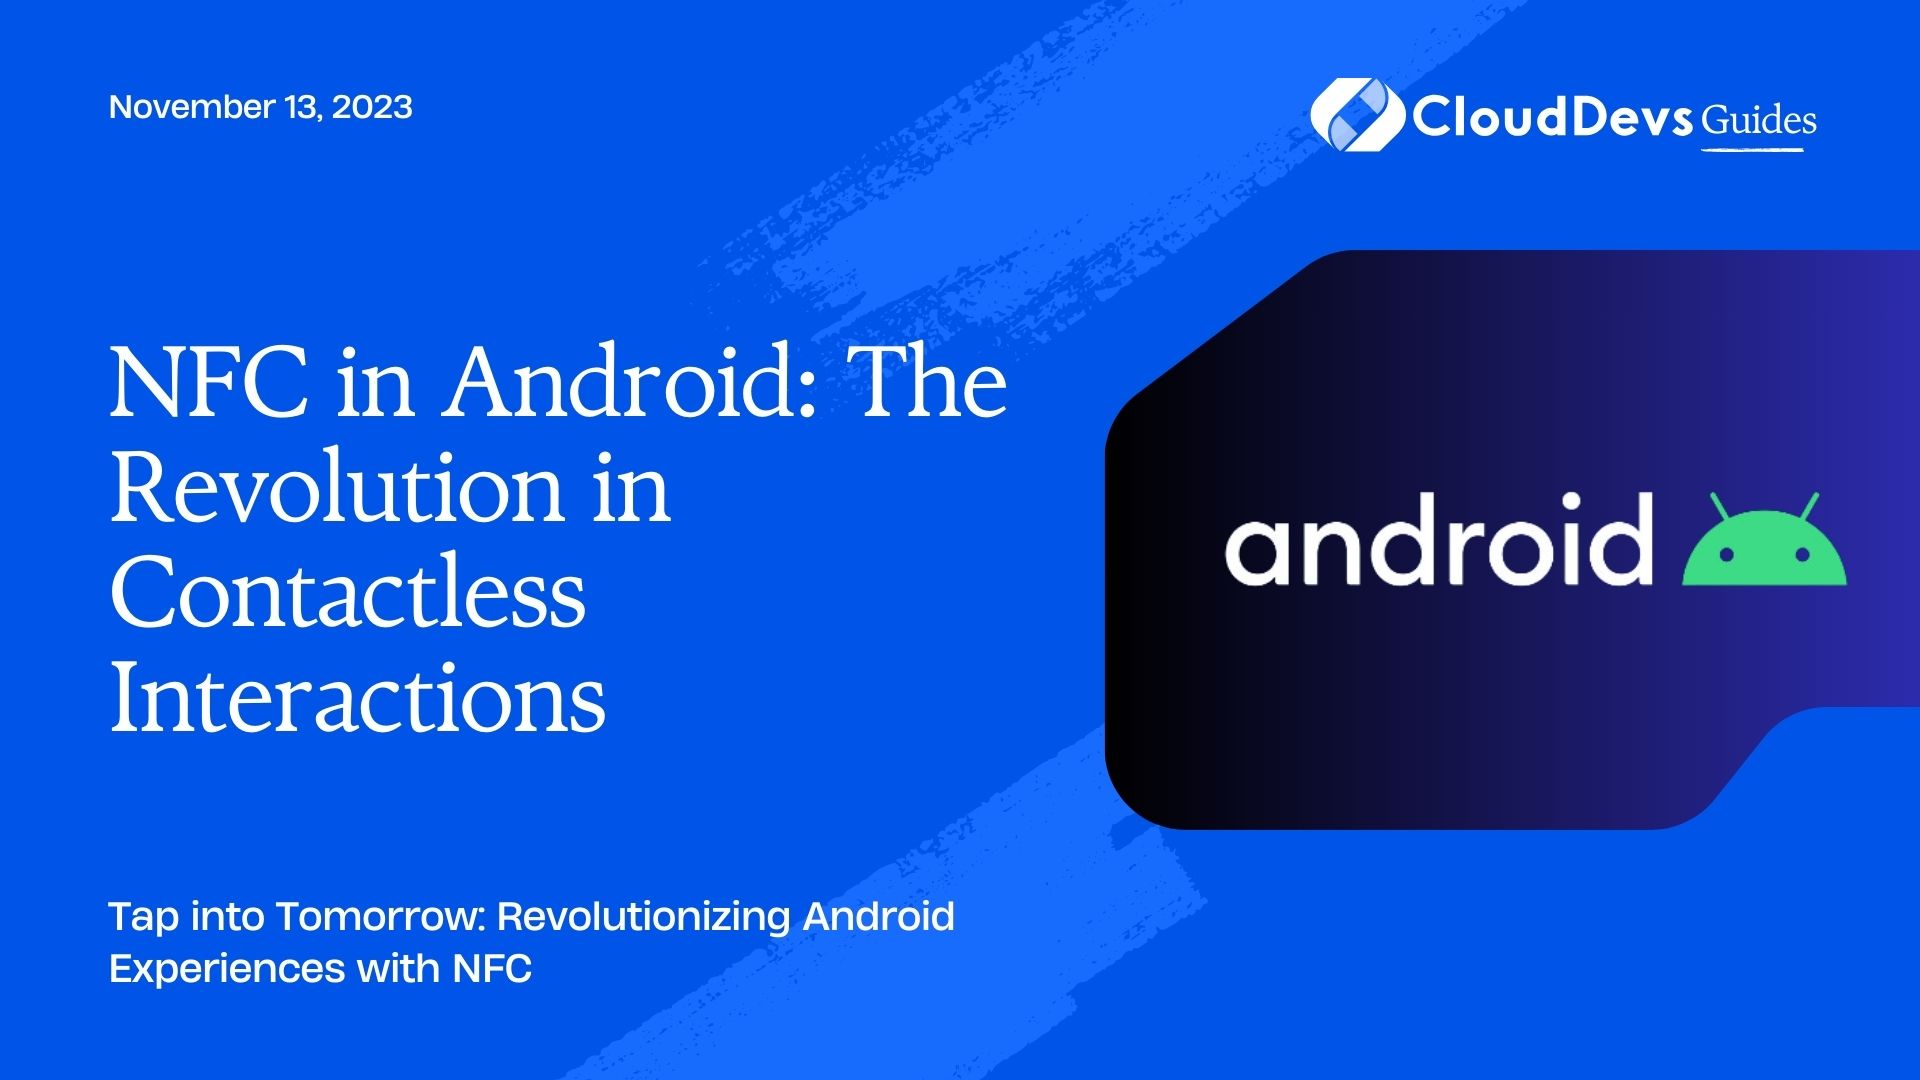 NFC in Android: The Revolution in Contactless Interactions